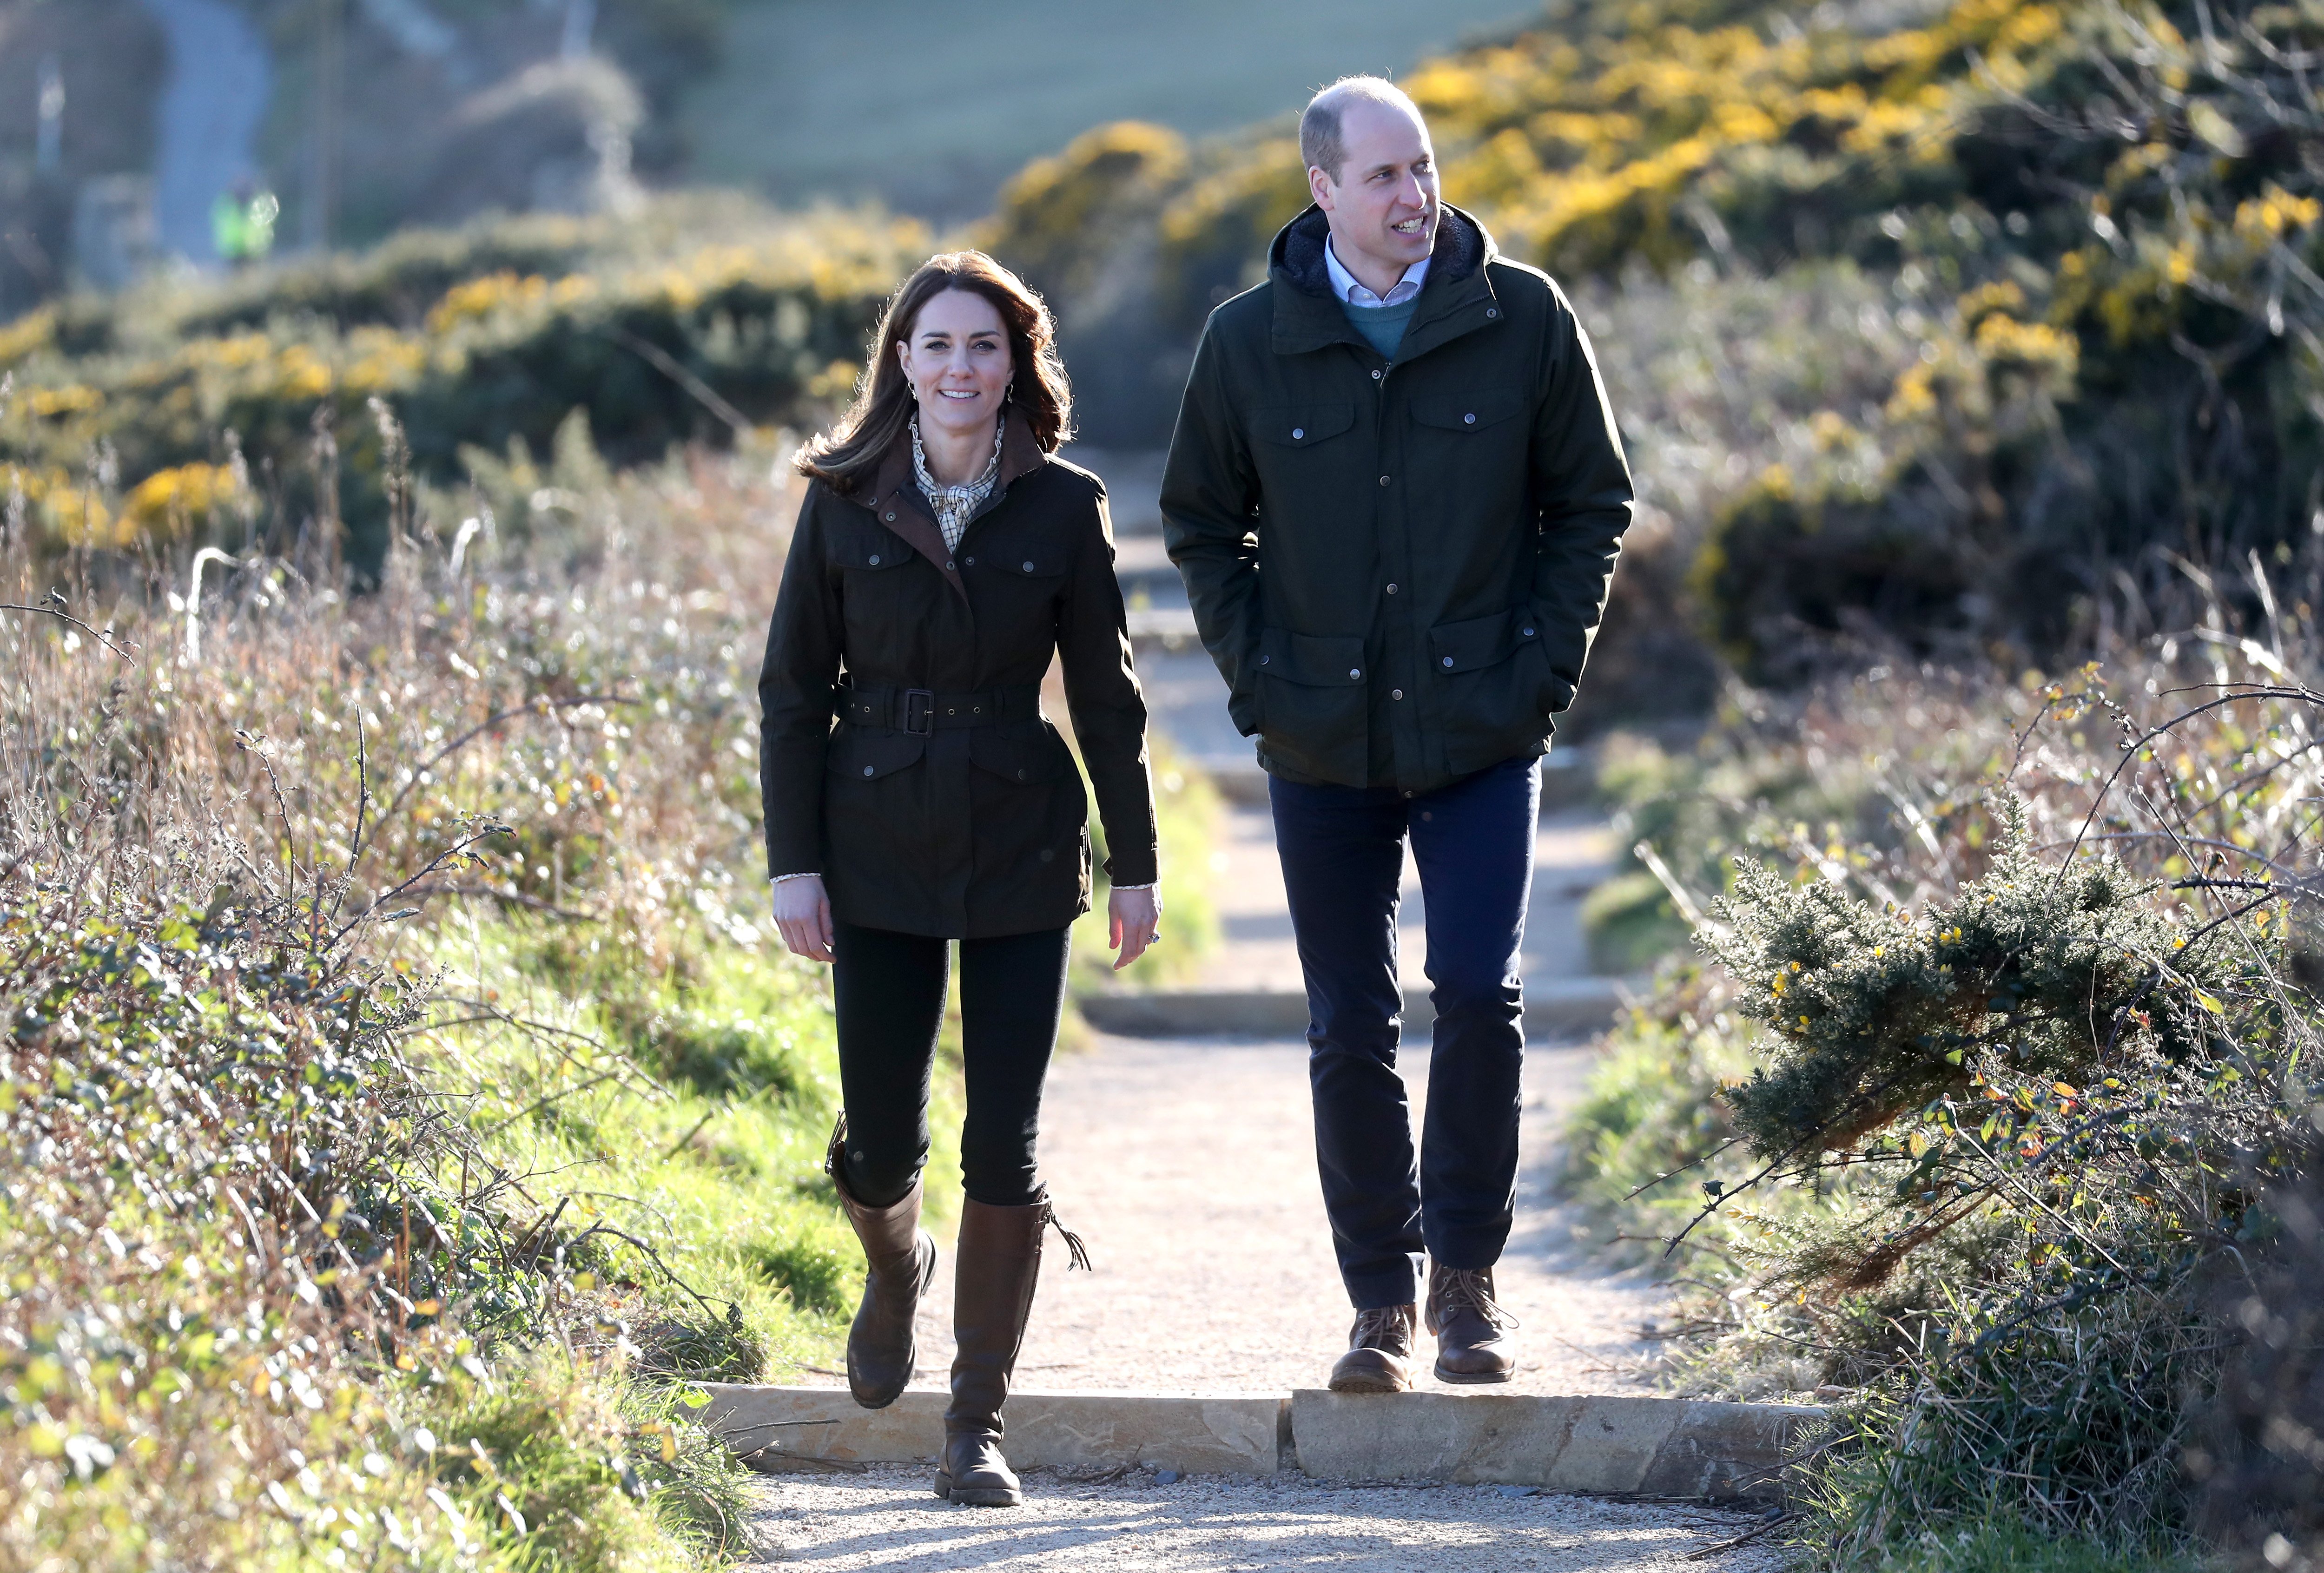 Kate Middleton and Prince William visit Howth Cliff, a cliff walk with views out over the Irish Sea during day two of their visit to Ireland on March 04, 2020 in Dublin, Ireland | Photo: Getty Images